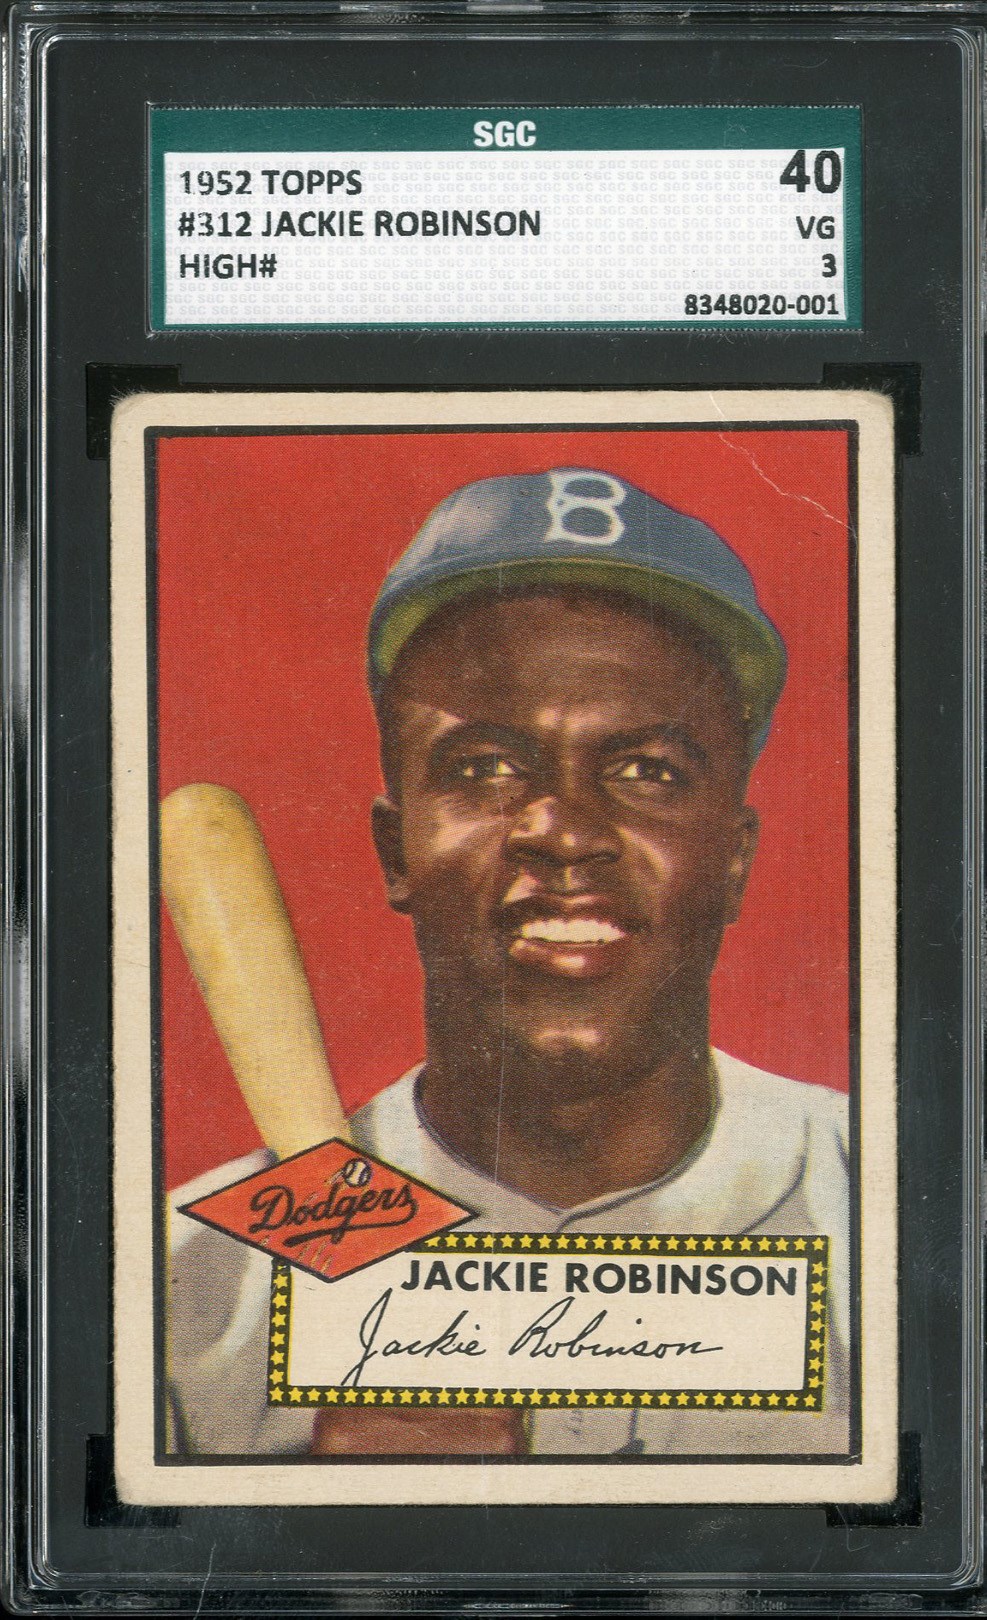 Baseball and Trading Cards - 1952 Topps #312 Jackie Robinson - SGC Graded